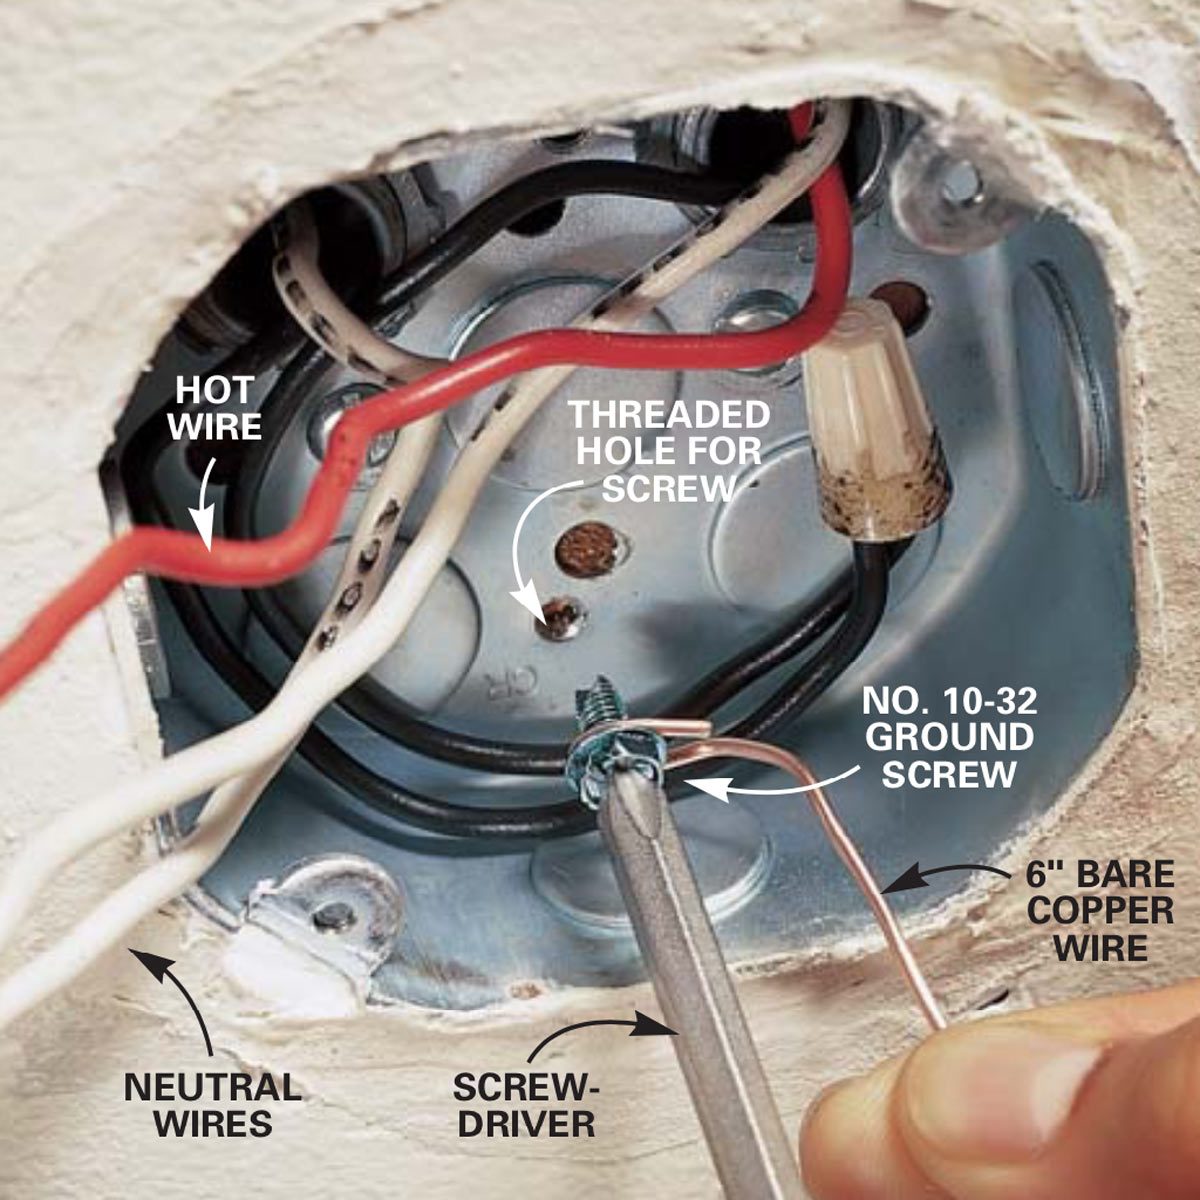 electrical - How to wire lighting fixture with two sets of hot, neutral,  and ground? - Home Improvement Stack Exchange